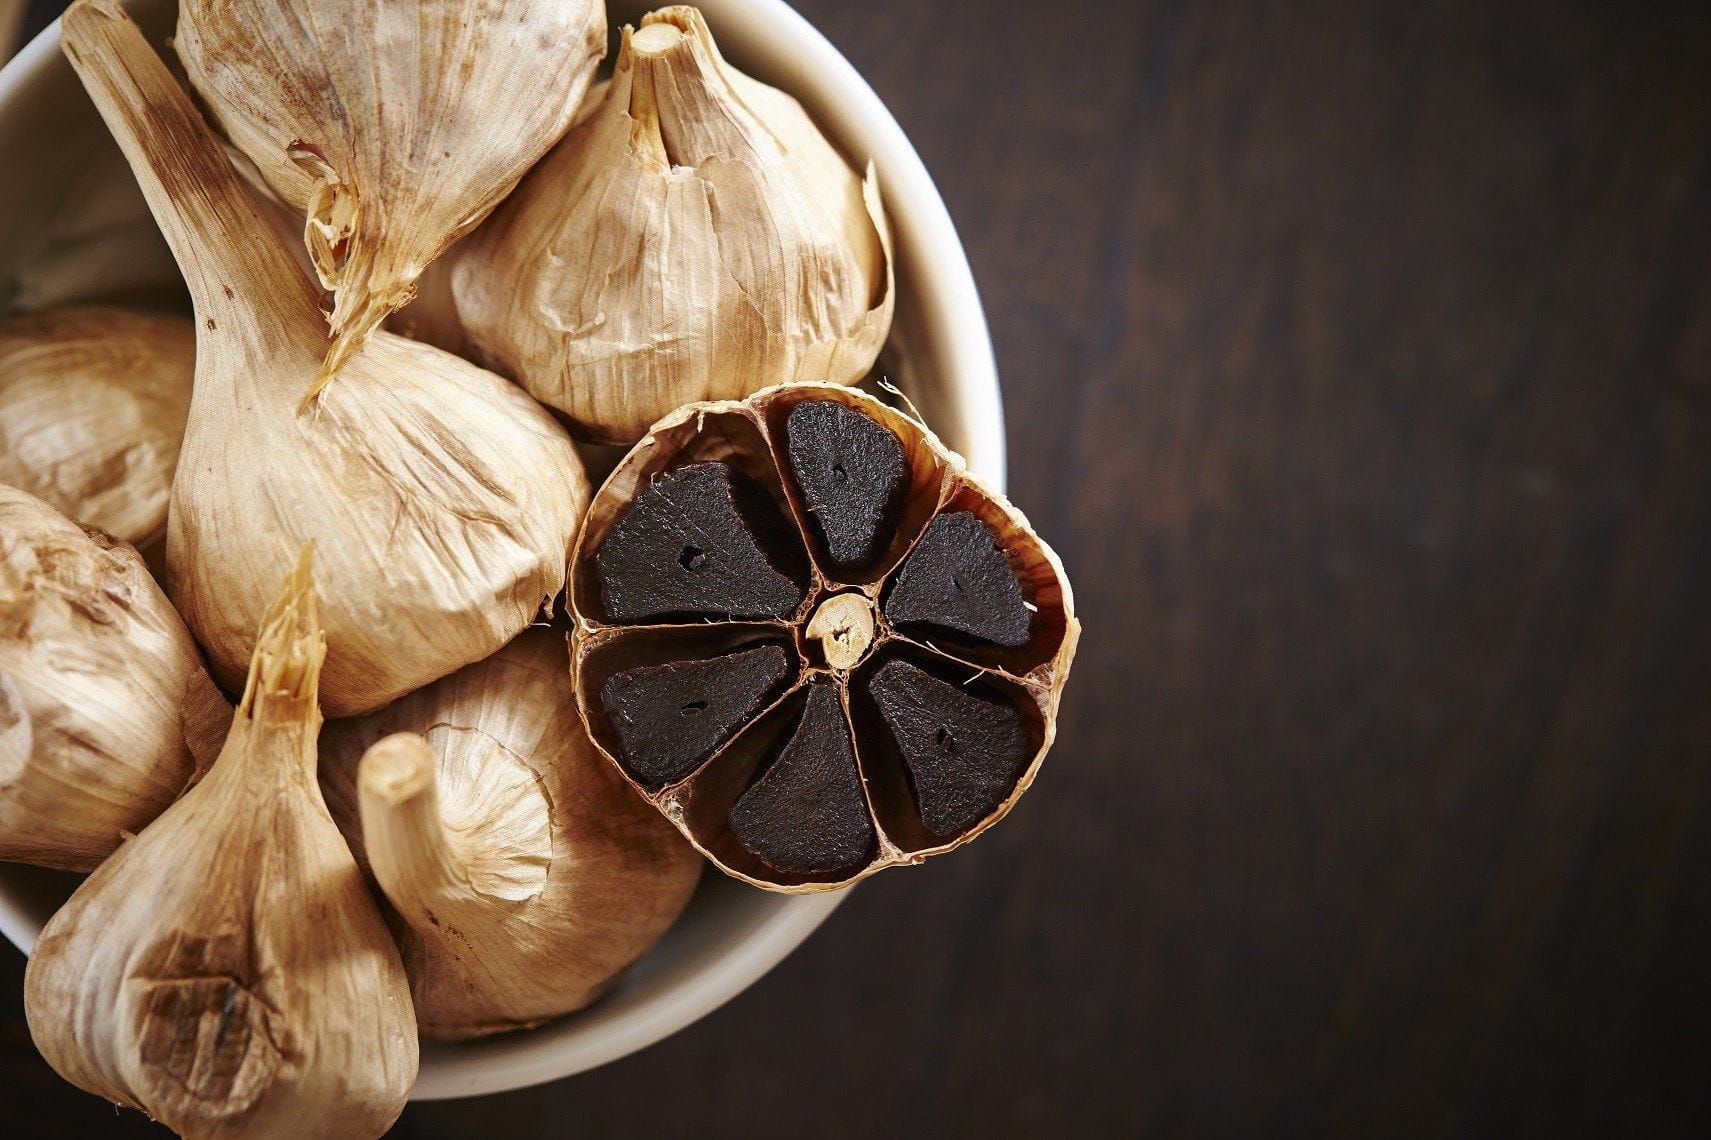 Aged Black Garlic Extract Lowers High Blood Pressure